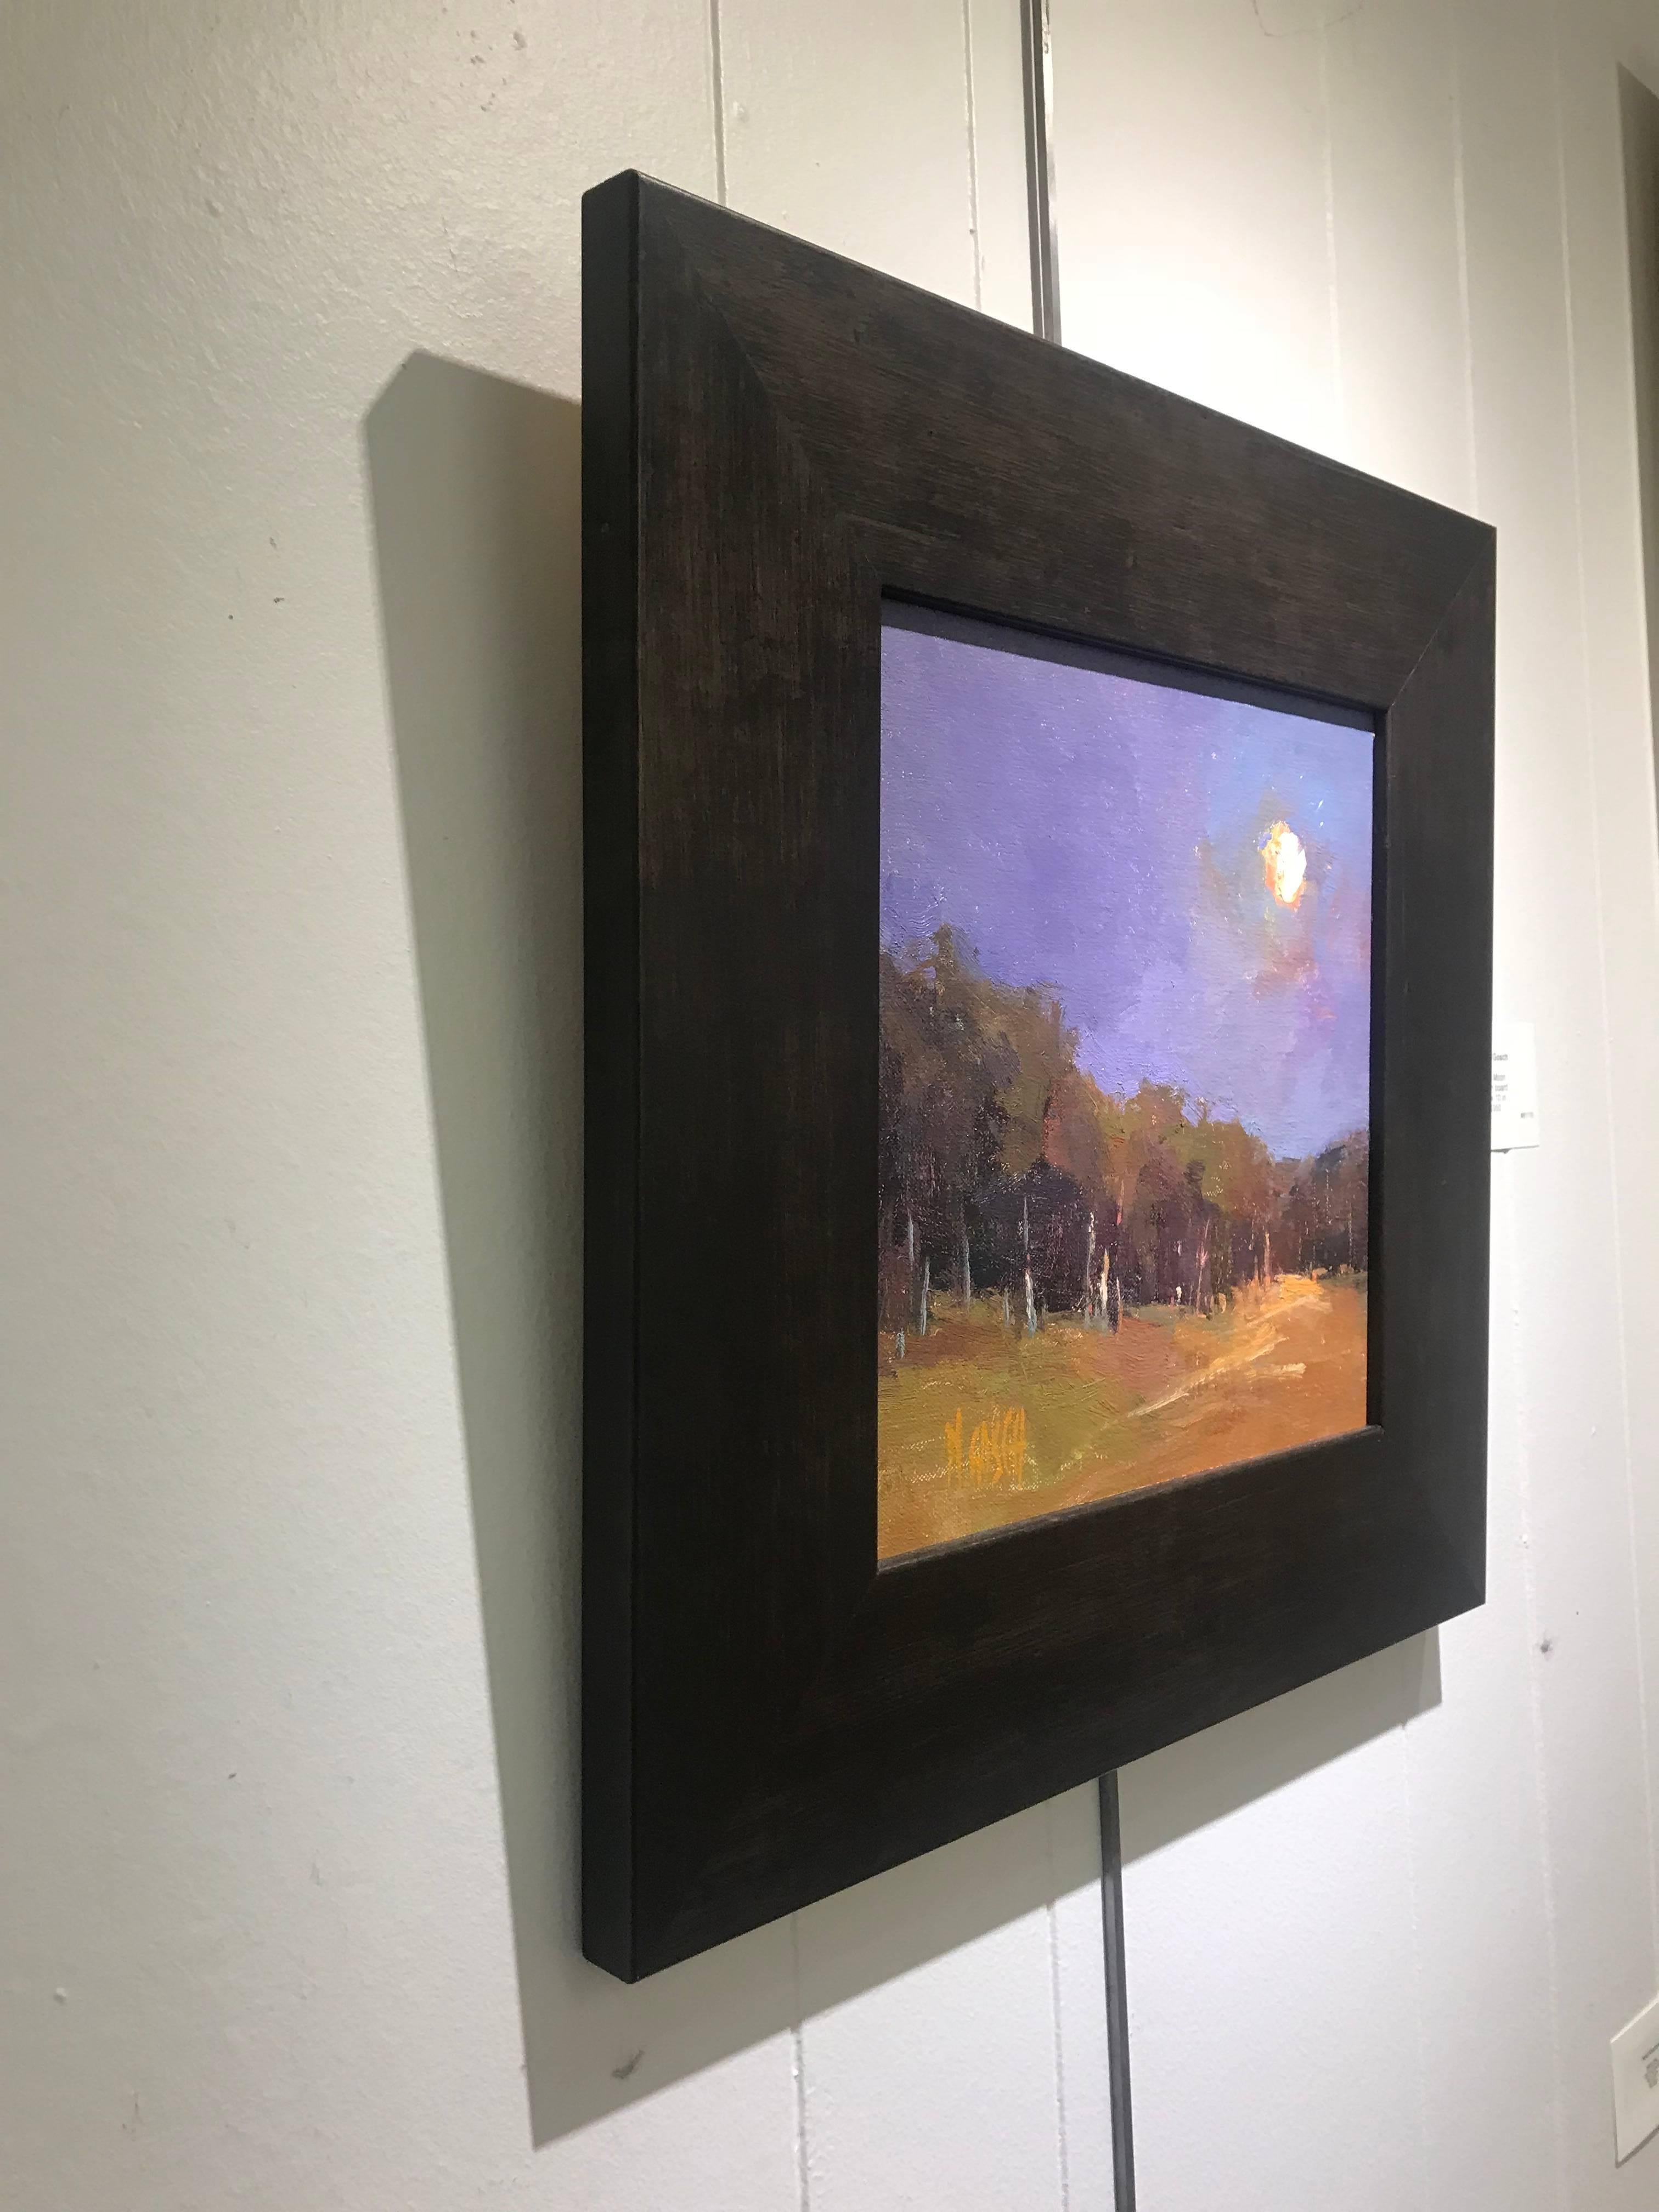 Full Moon, Square Framed Impressionist Plein Air Landscape Oil on Board Painting 1